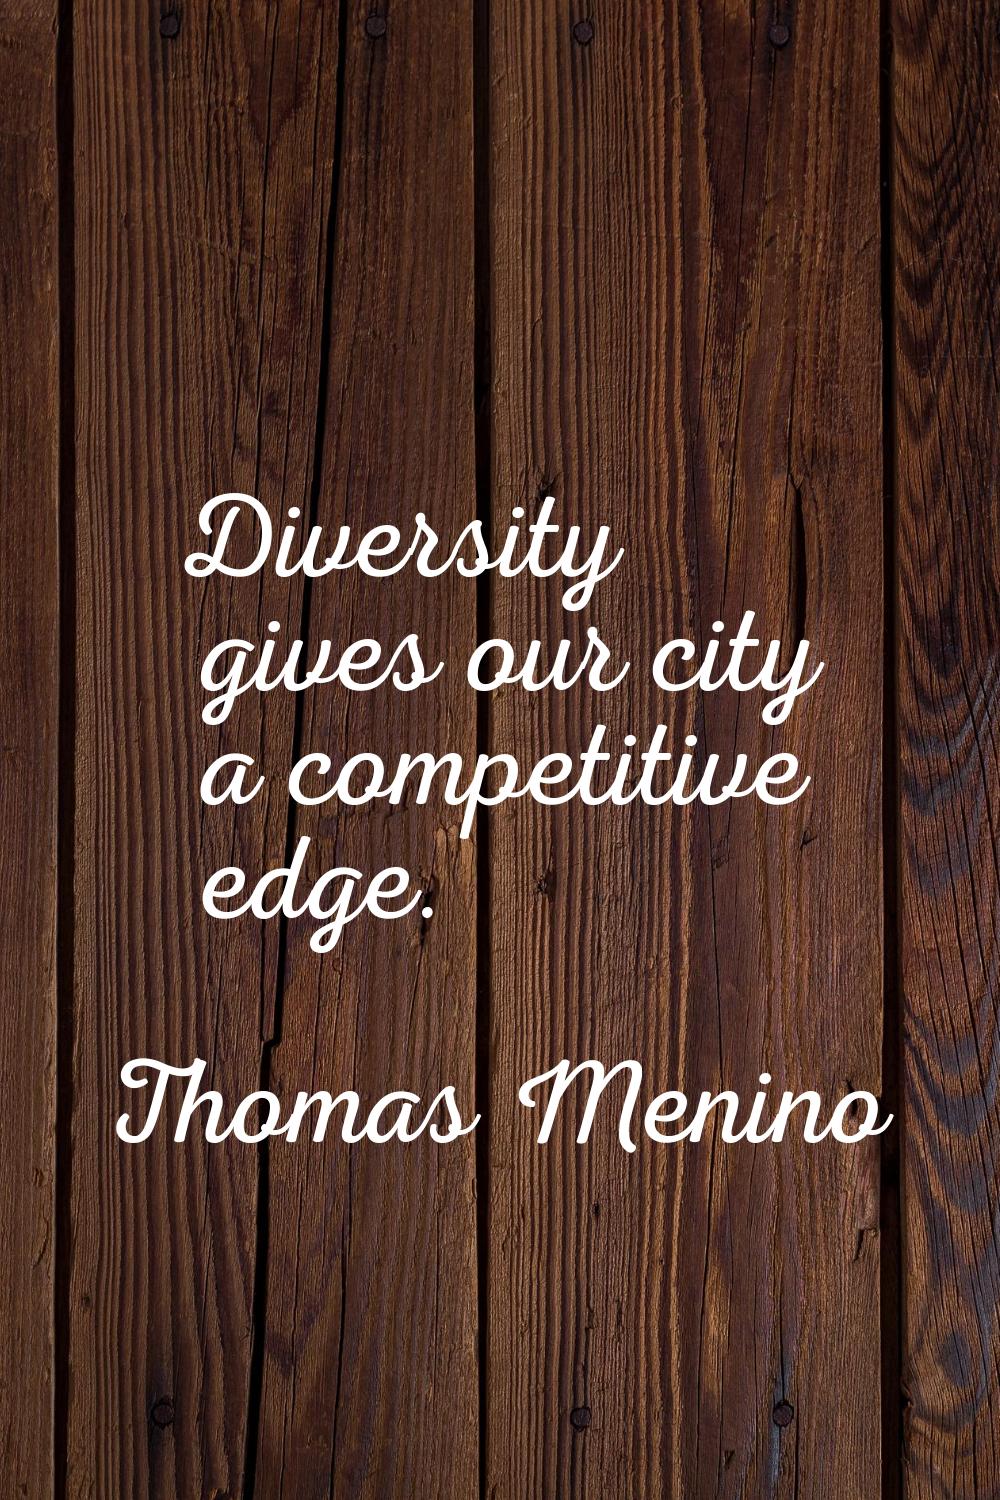 Diversity gives our city a competitive edge.